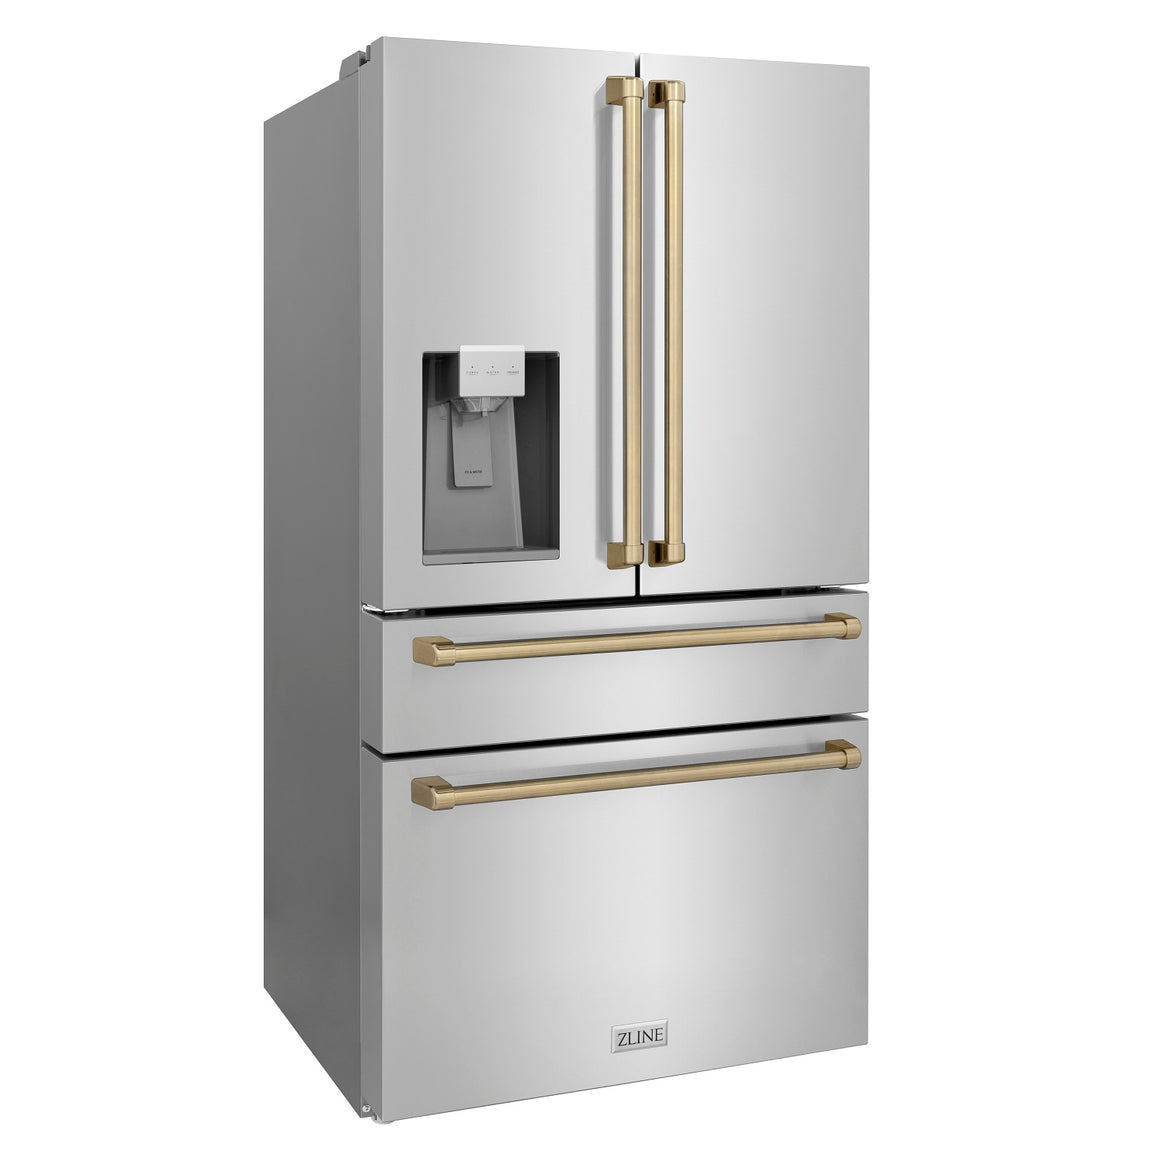 ZLINE 36" Autograph Edition 21.6 cu. ft French Door Refrigerator with Water and Ice Dispenser in Stainless Steel with Champagne Bronze Accents